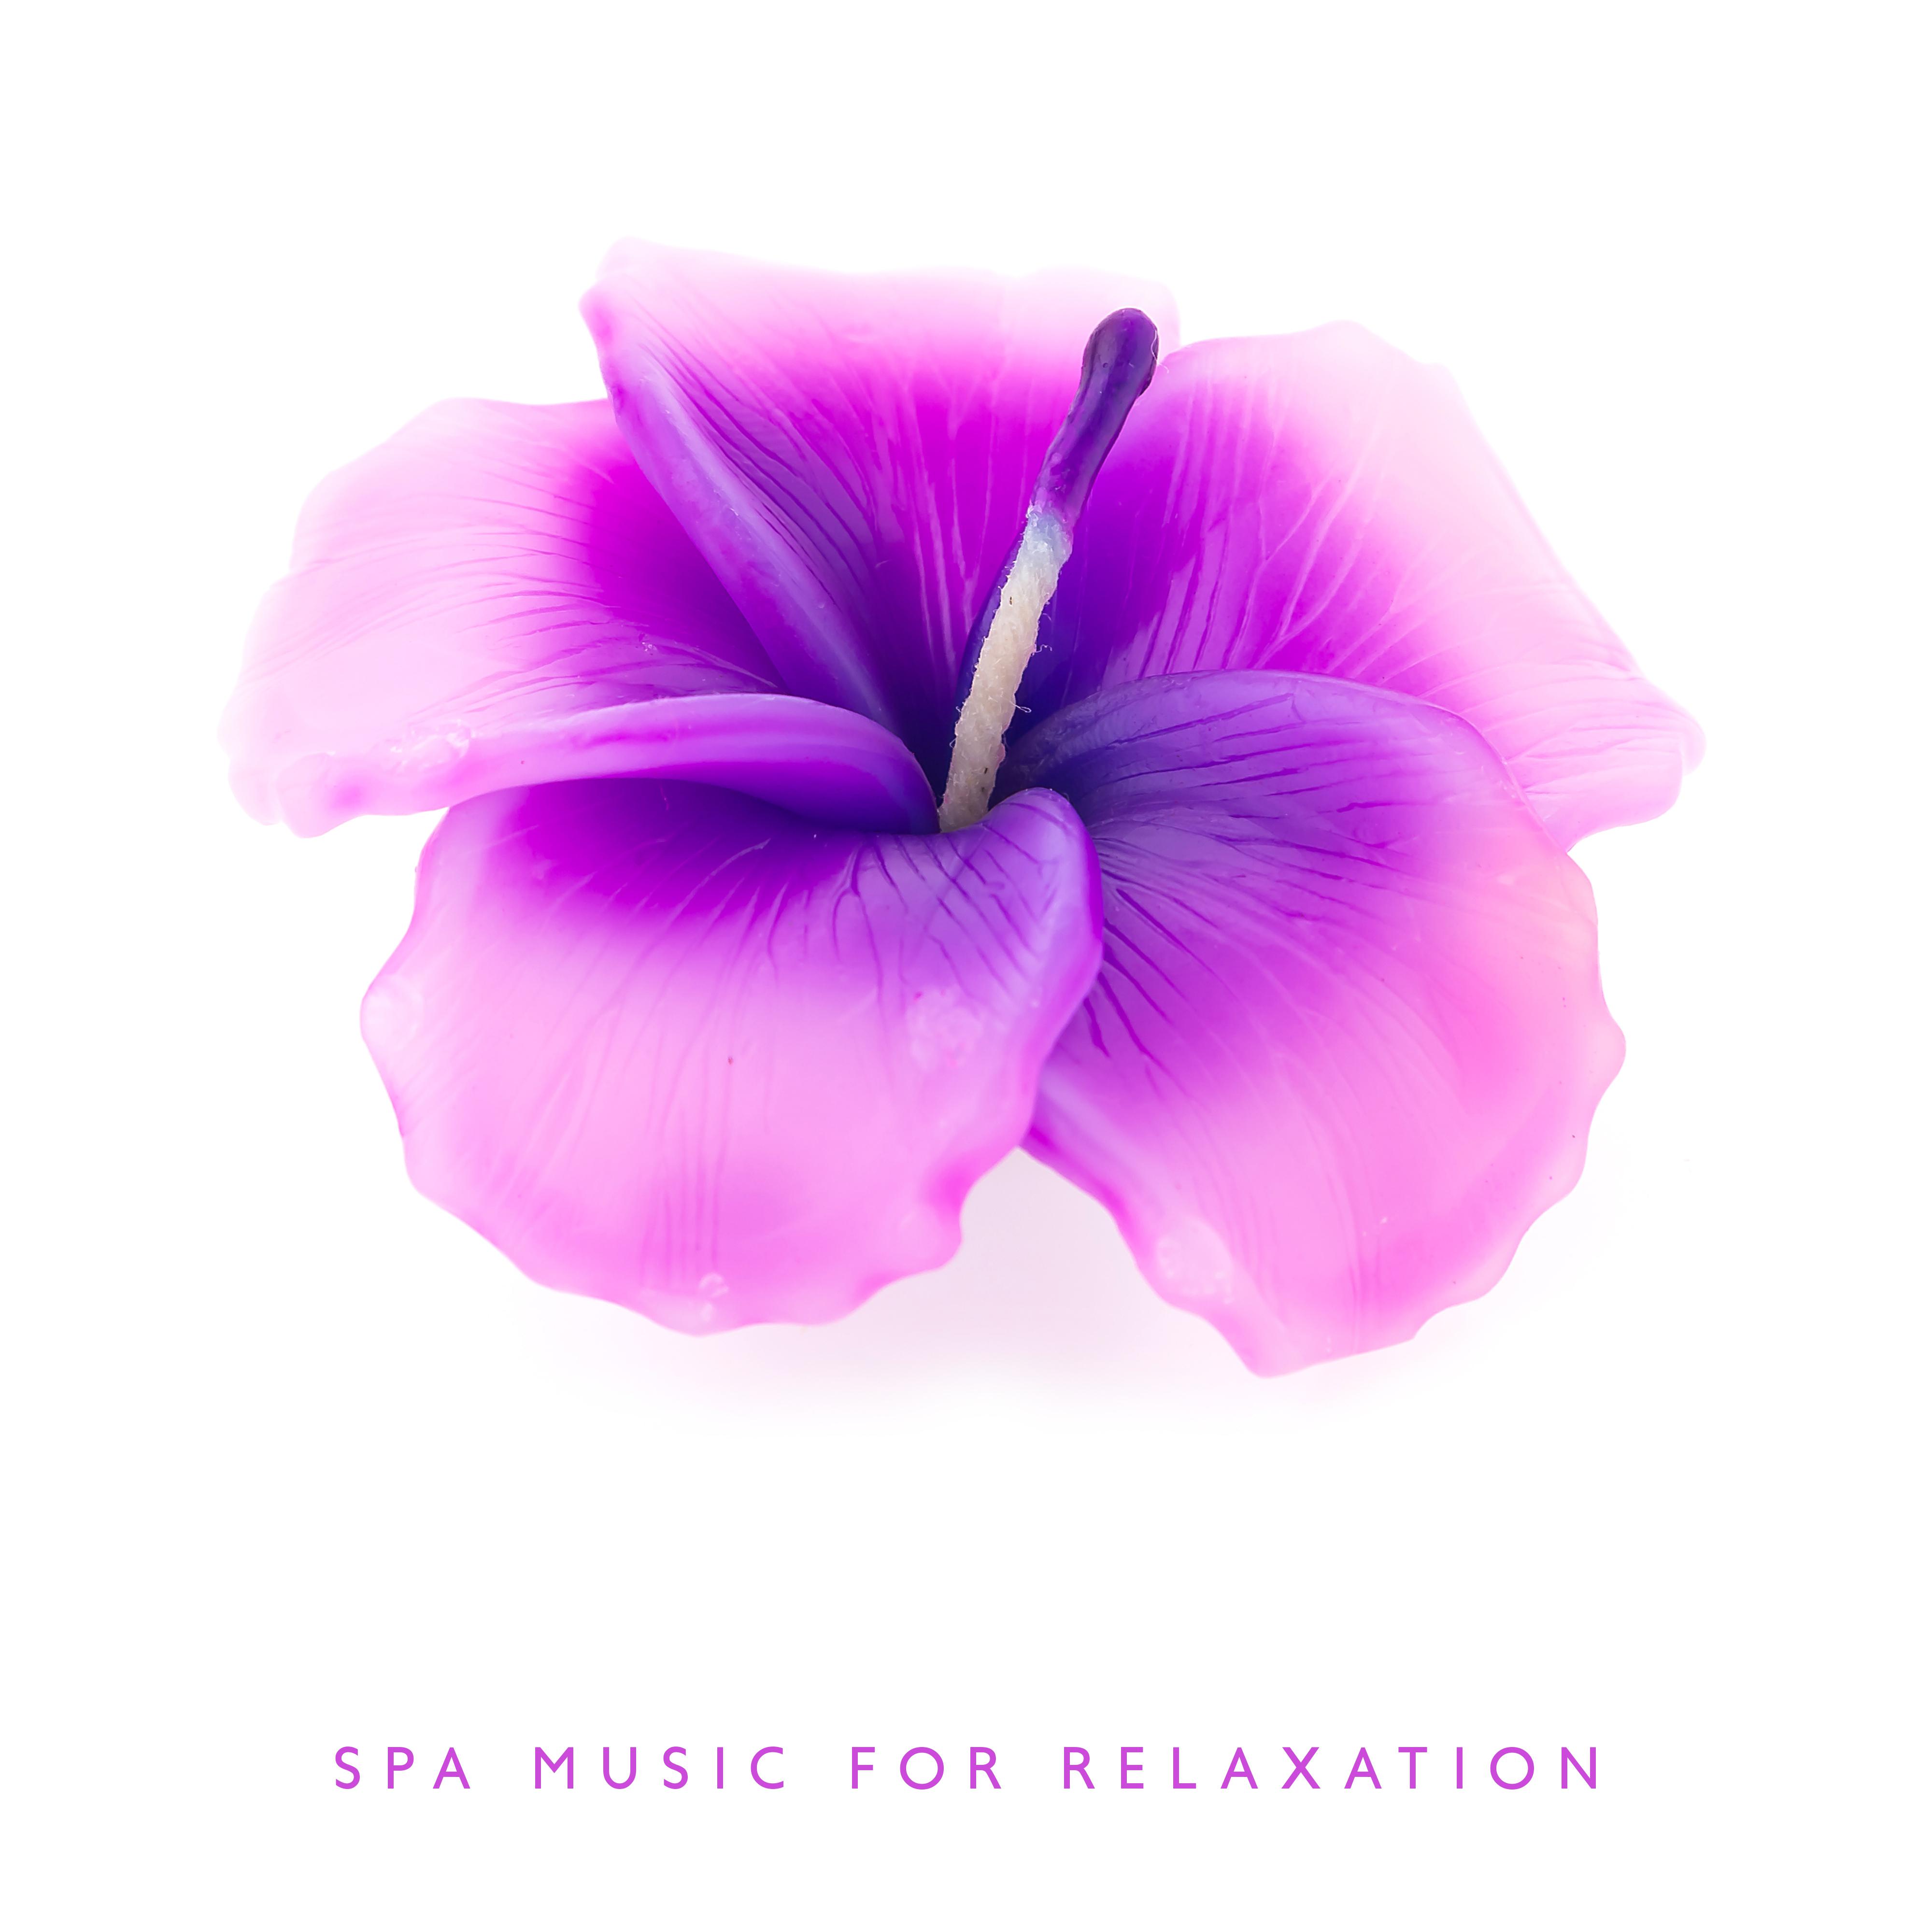 Spa Music for Relaxation - Best Playlist of Music from the Spa for Relaxation, a Moment of Rest, De-stressing and Immersion in a Soothing Sleep